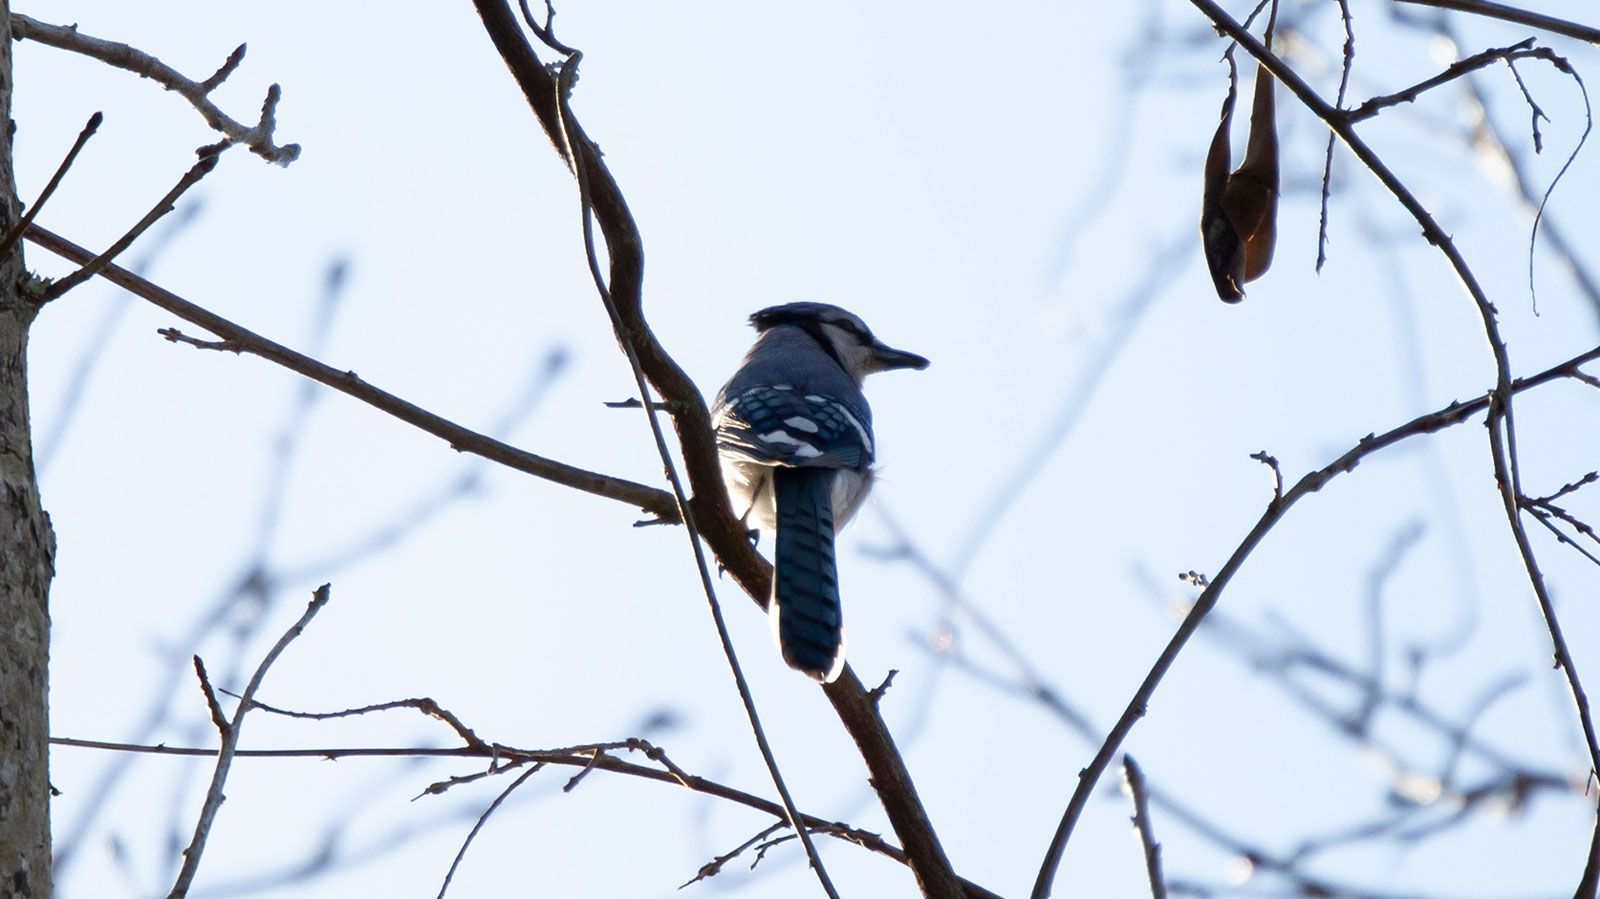 Blue jay looking out from its perch on a branch